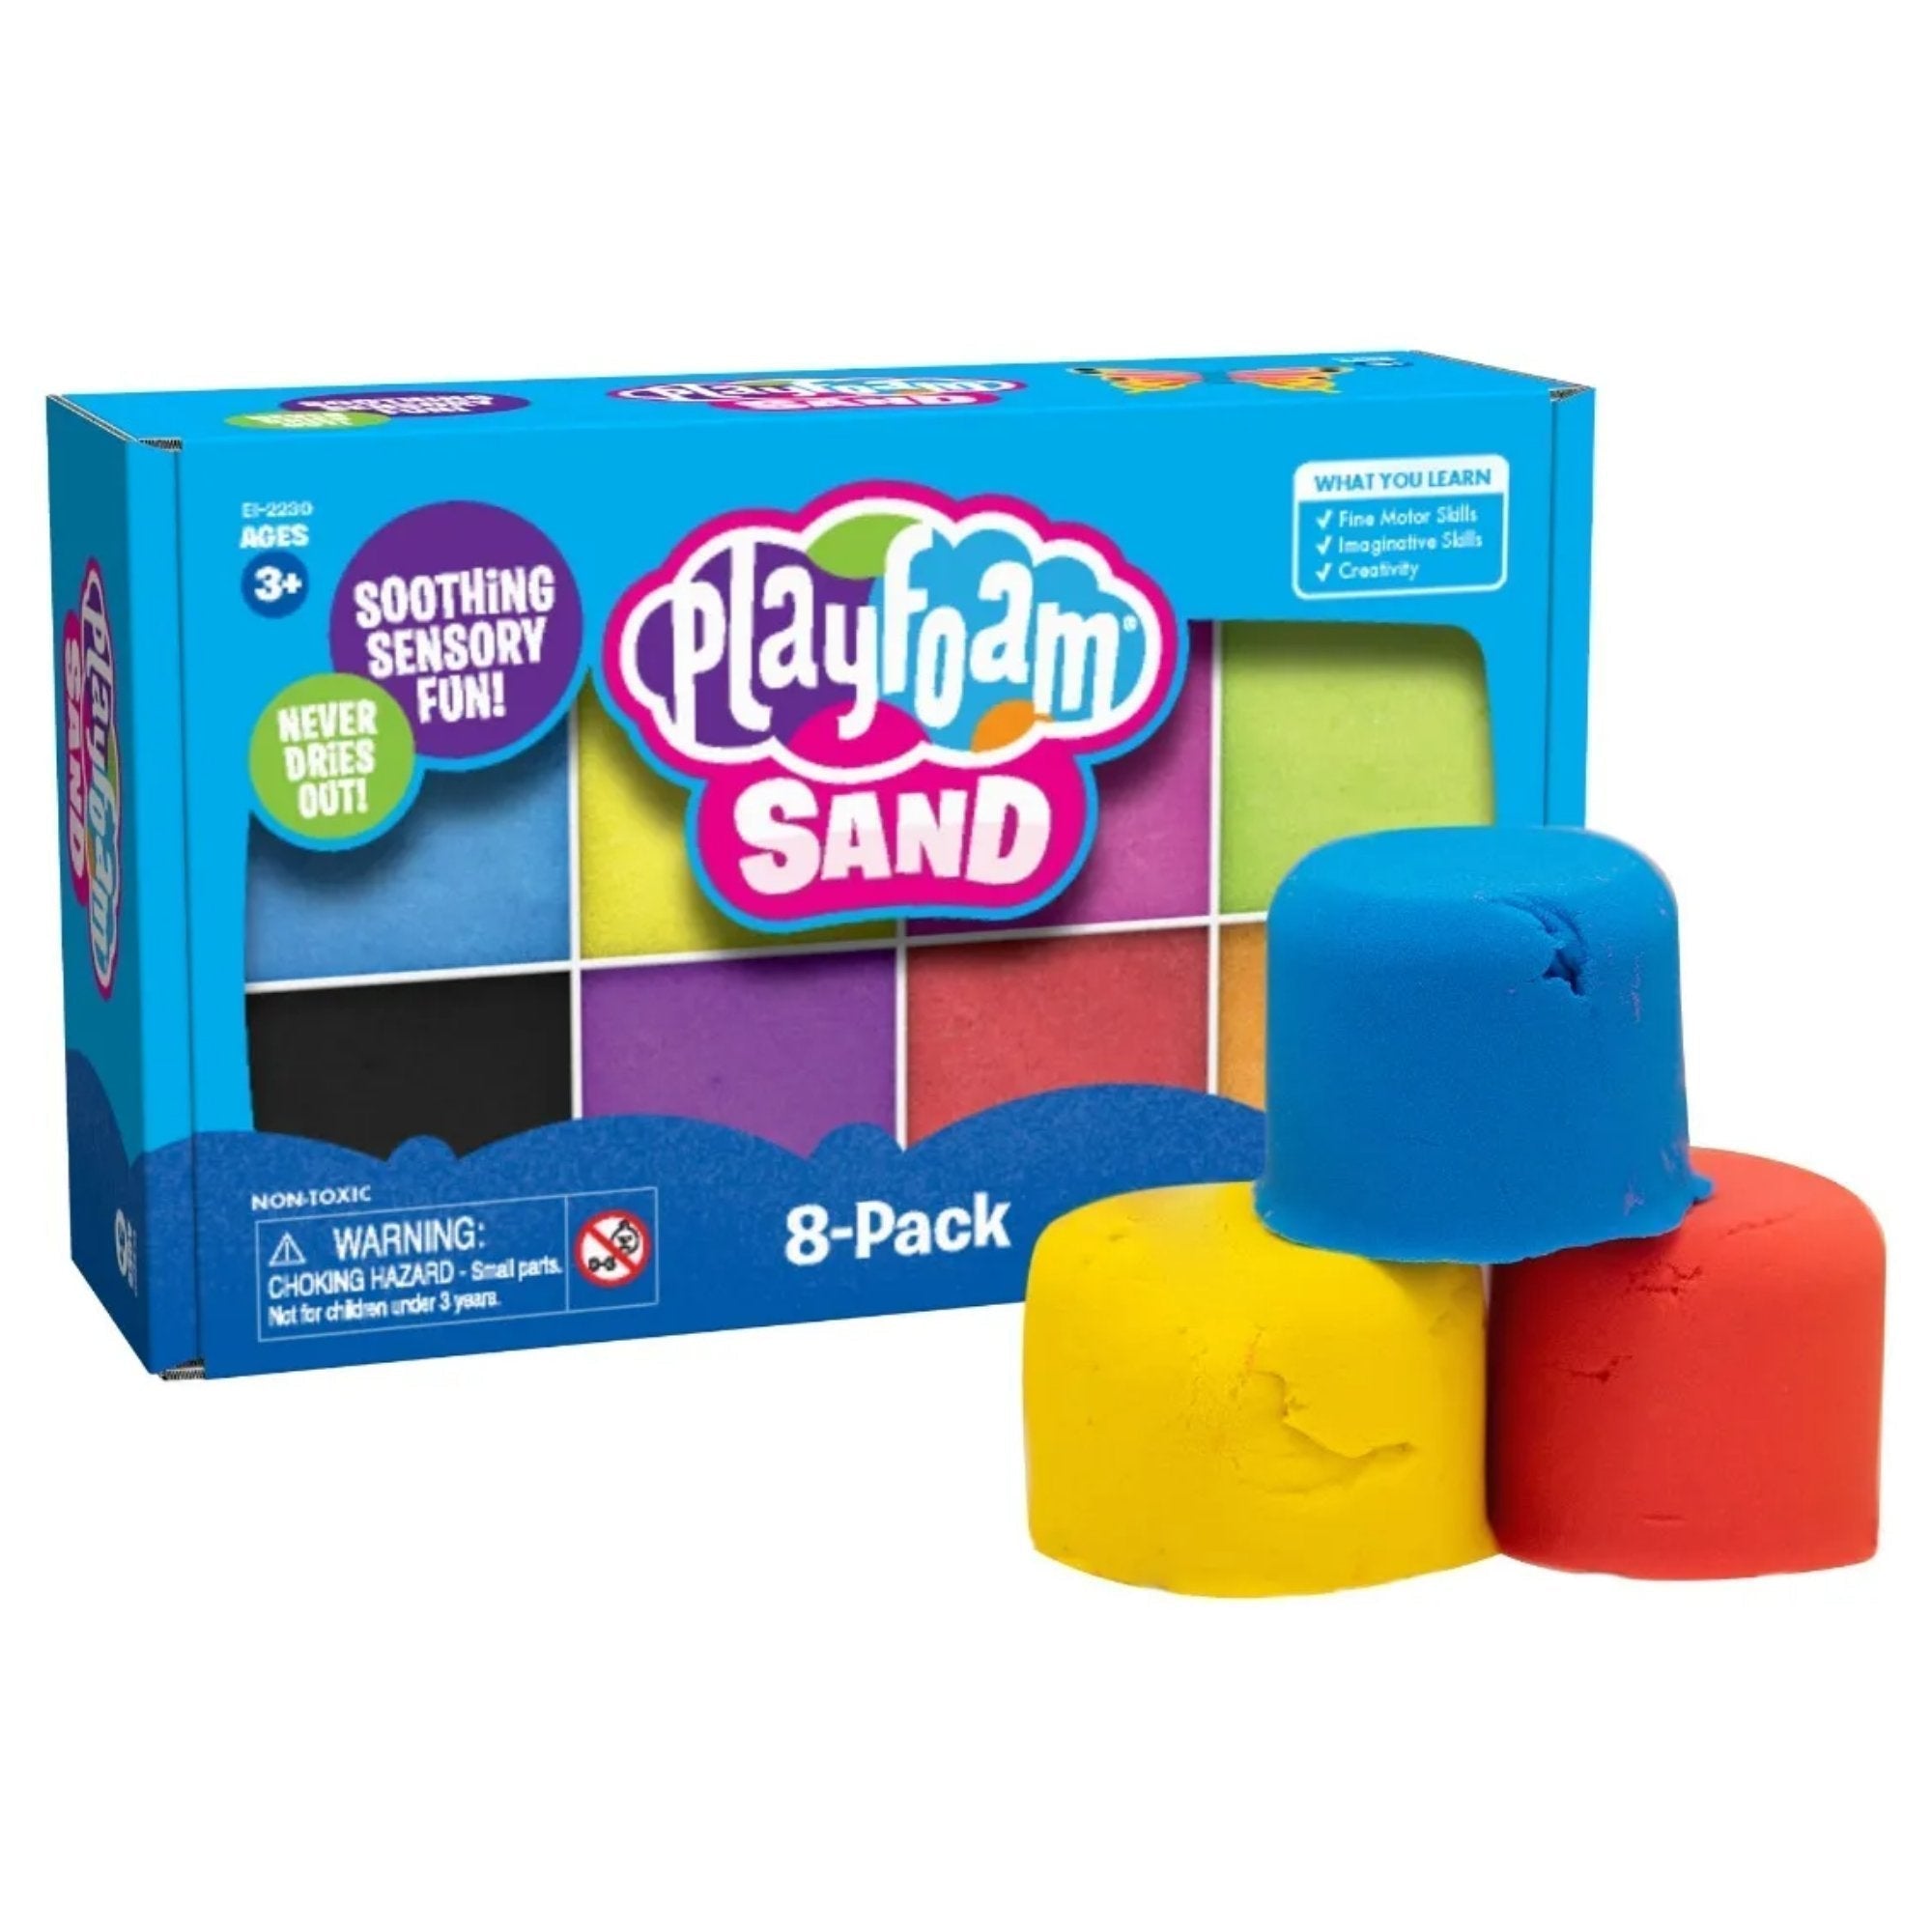 Playfoam Sand 8-Pack- Playfoam Sand 8-Pack,Messy play sand special needs,special needs tactile games ideas,special needs sensory games and ideas,Indulge in the soft, sculpting shaping fun of Playfoam® Sand! This tactile play sand offers a unique sensory experience, allowing children to sculpt, squish, mould, sift, and scoop like never before. Whether in the classroom or at home, Playfoam Sand provides endless opportunities for sensory exploration and fine motor skill development. Playfoam Sand 8-Pack Descri